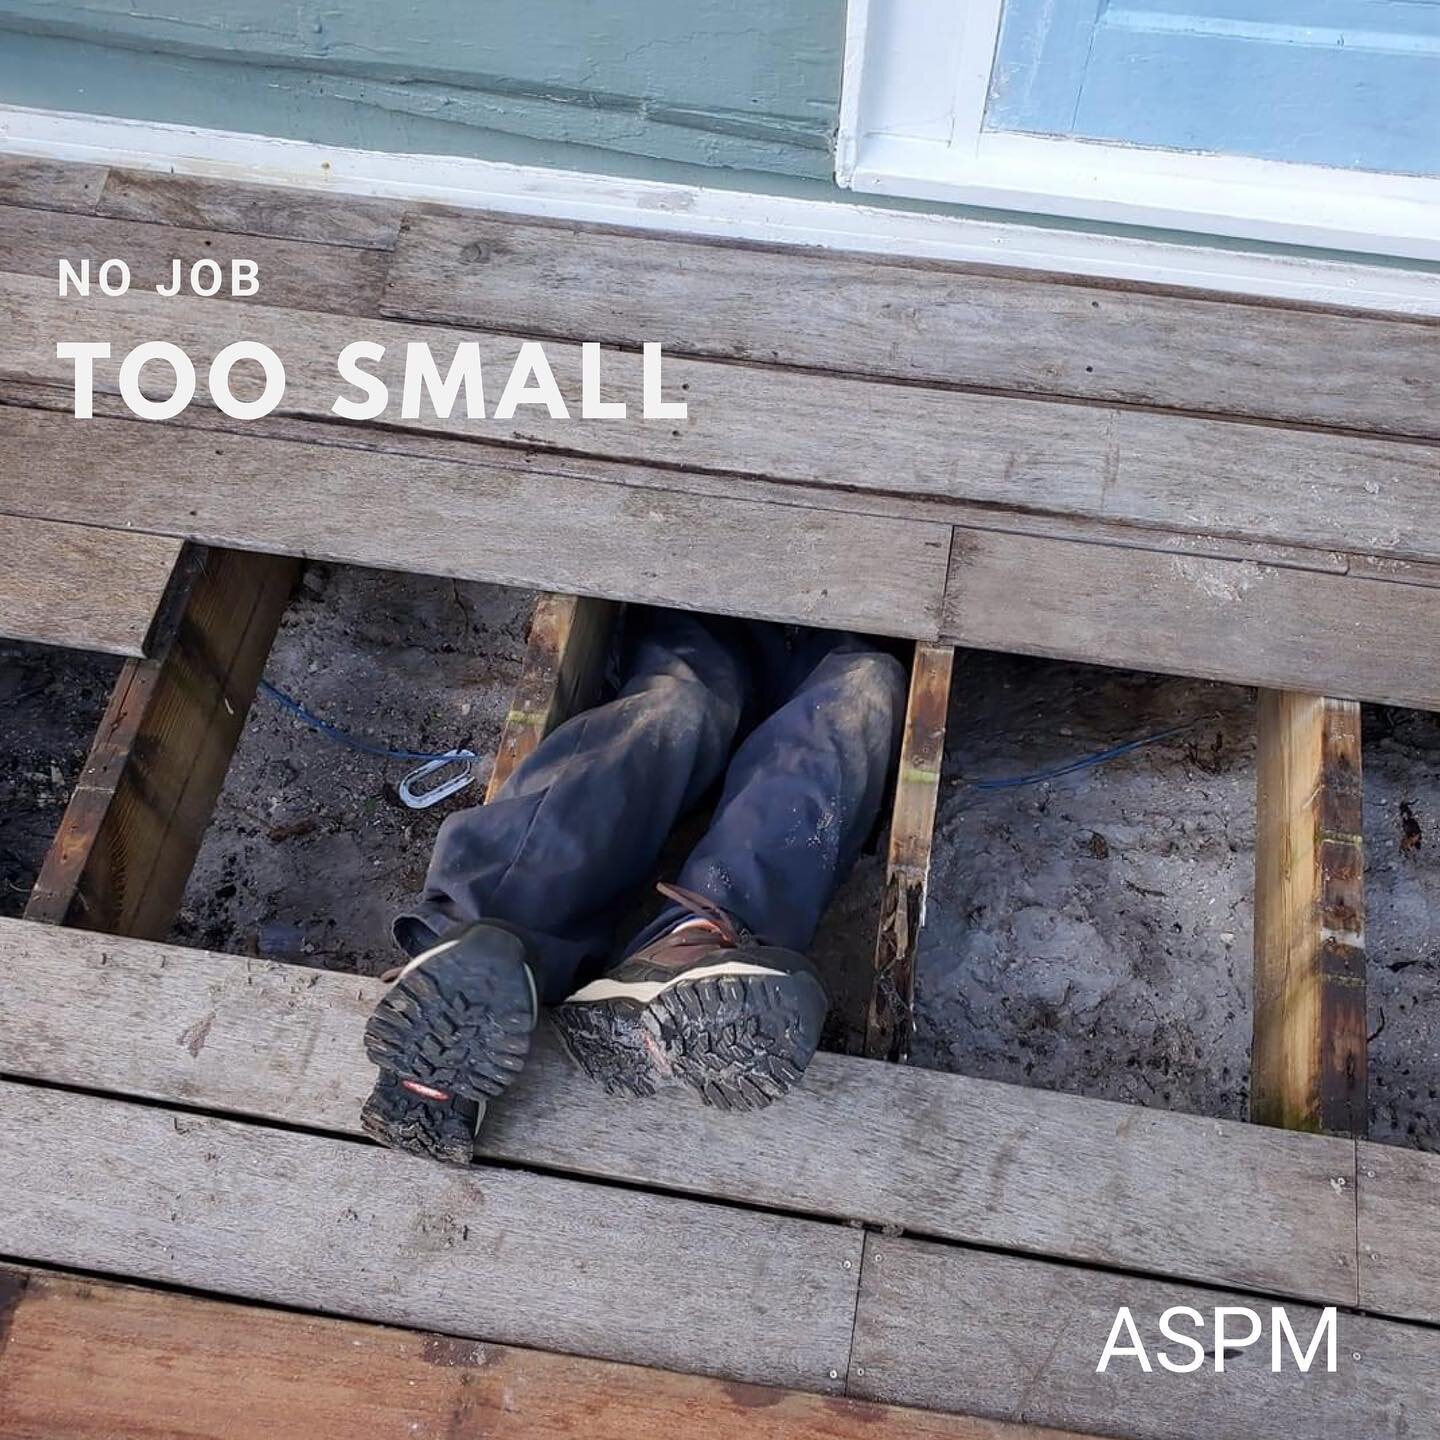 There is no job too small, too tall, too long, or too tough for ASPM. Whatever it is - we have your back!